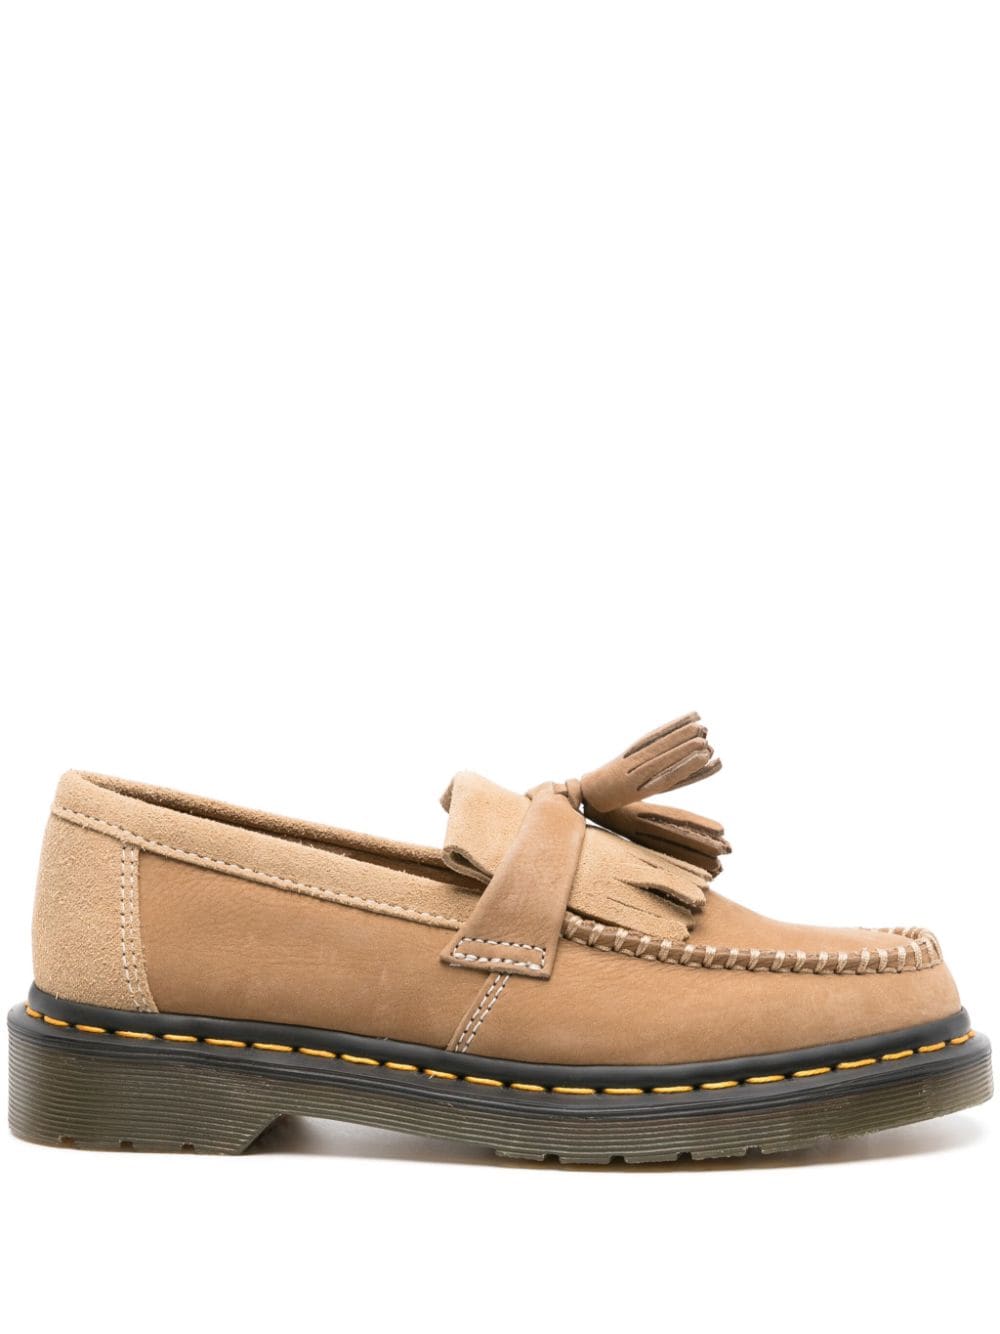 DR. MARTENS' ADRIAN SUEDE LOAFERS